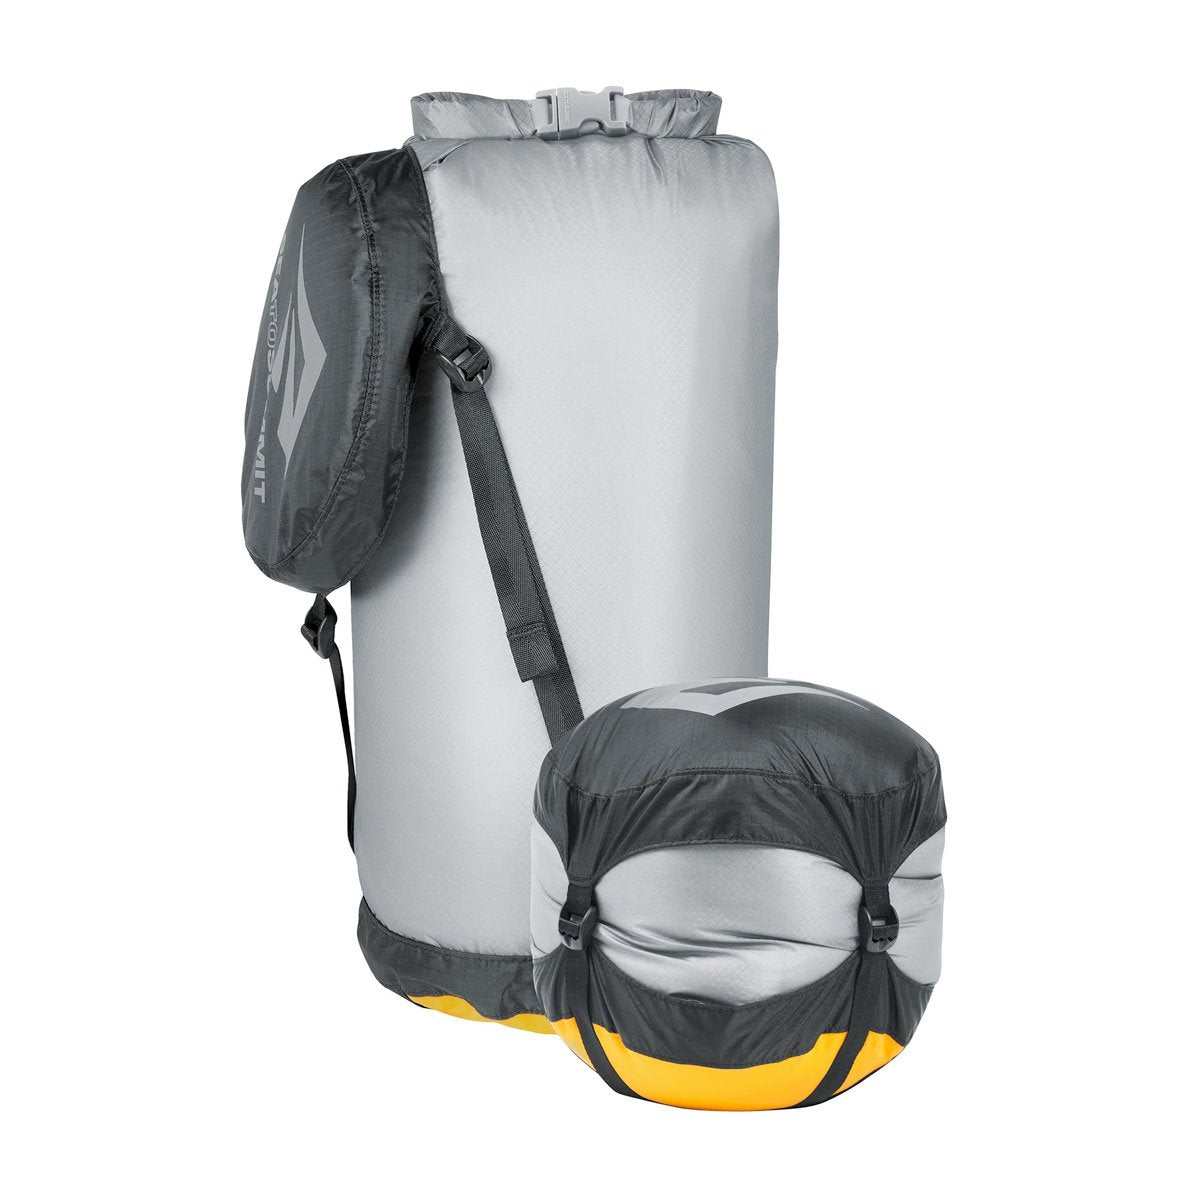 Sea to Summit Ultra-Sil Event Dry Compression Sack 3.3L/6L/10L/14L/20L Bags, Packs and Cases Sea To Summit Small / 10 Liter Tactical Gear Supplier Tactical Distributors Australia